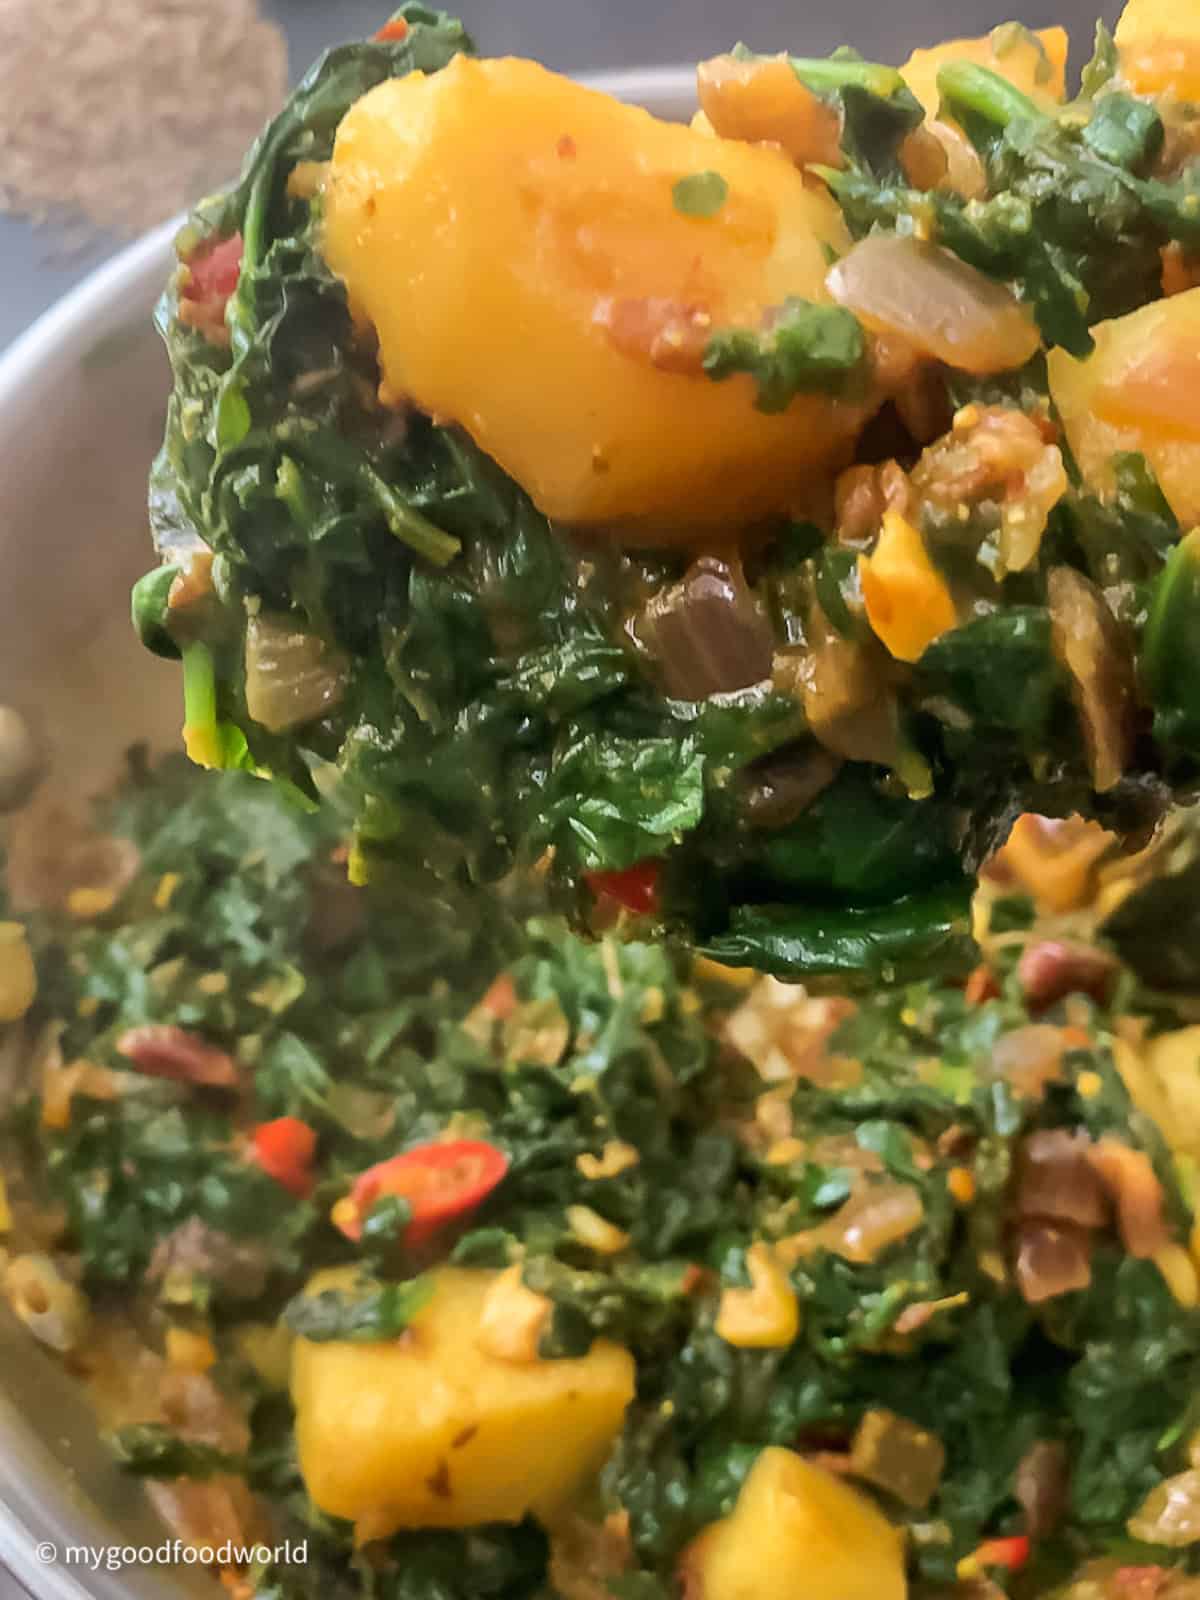 Aloo palak curry cooked to perfection with the potatoes soft cooked and the spinach coating the potatoes.